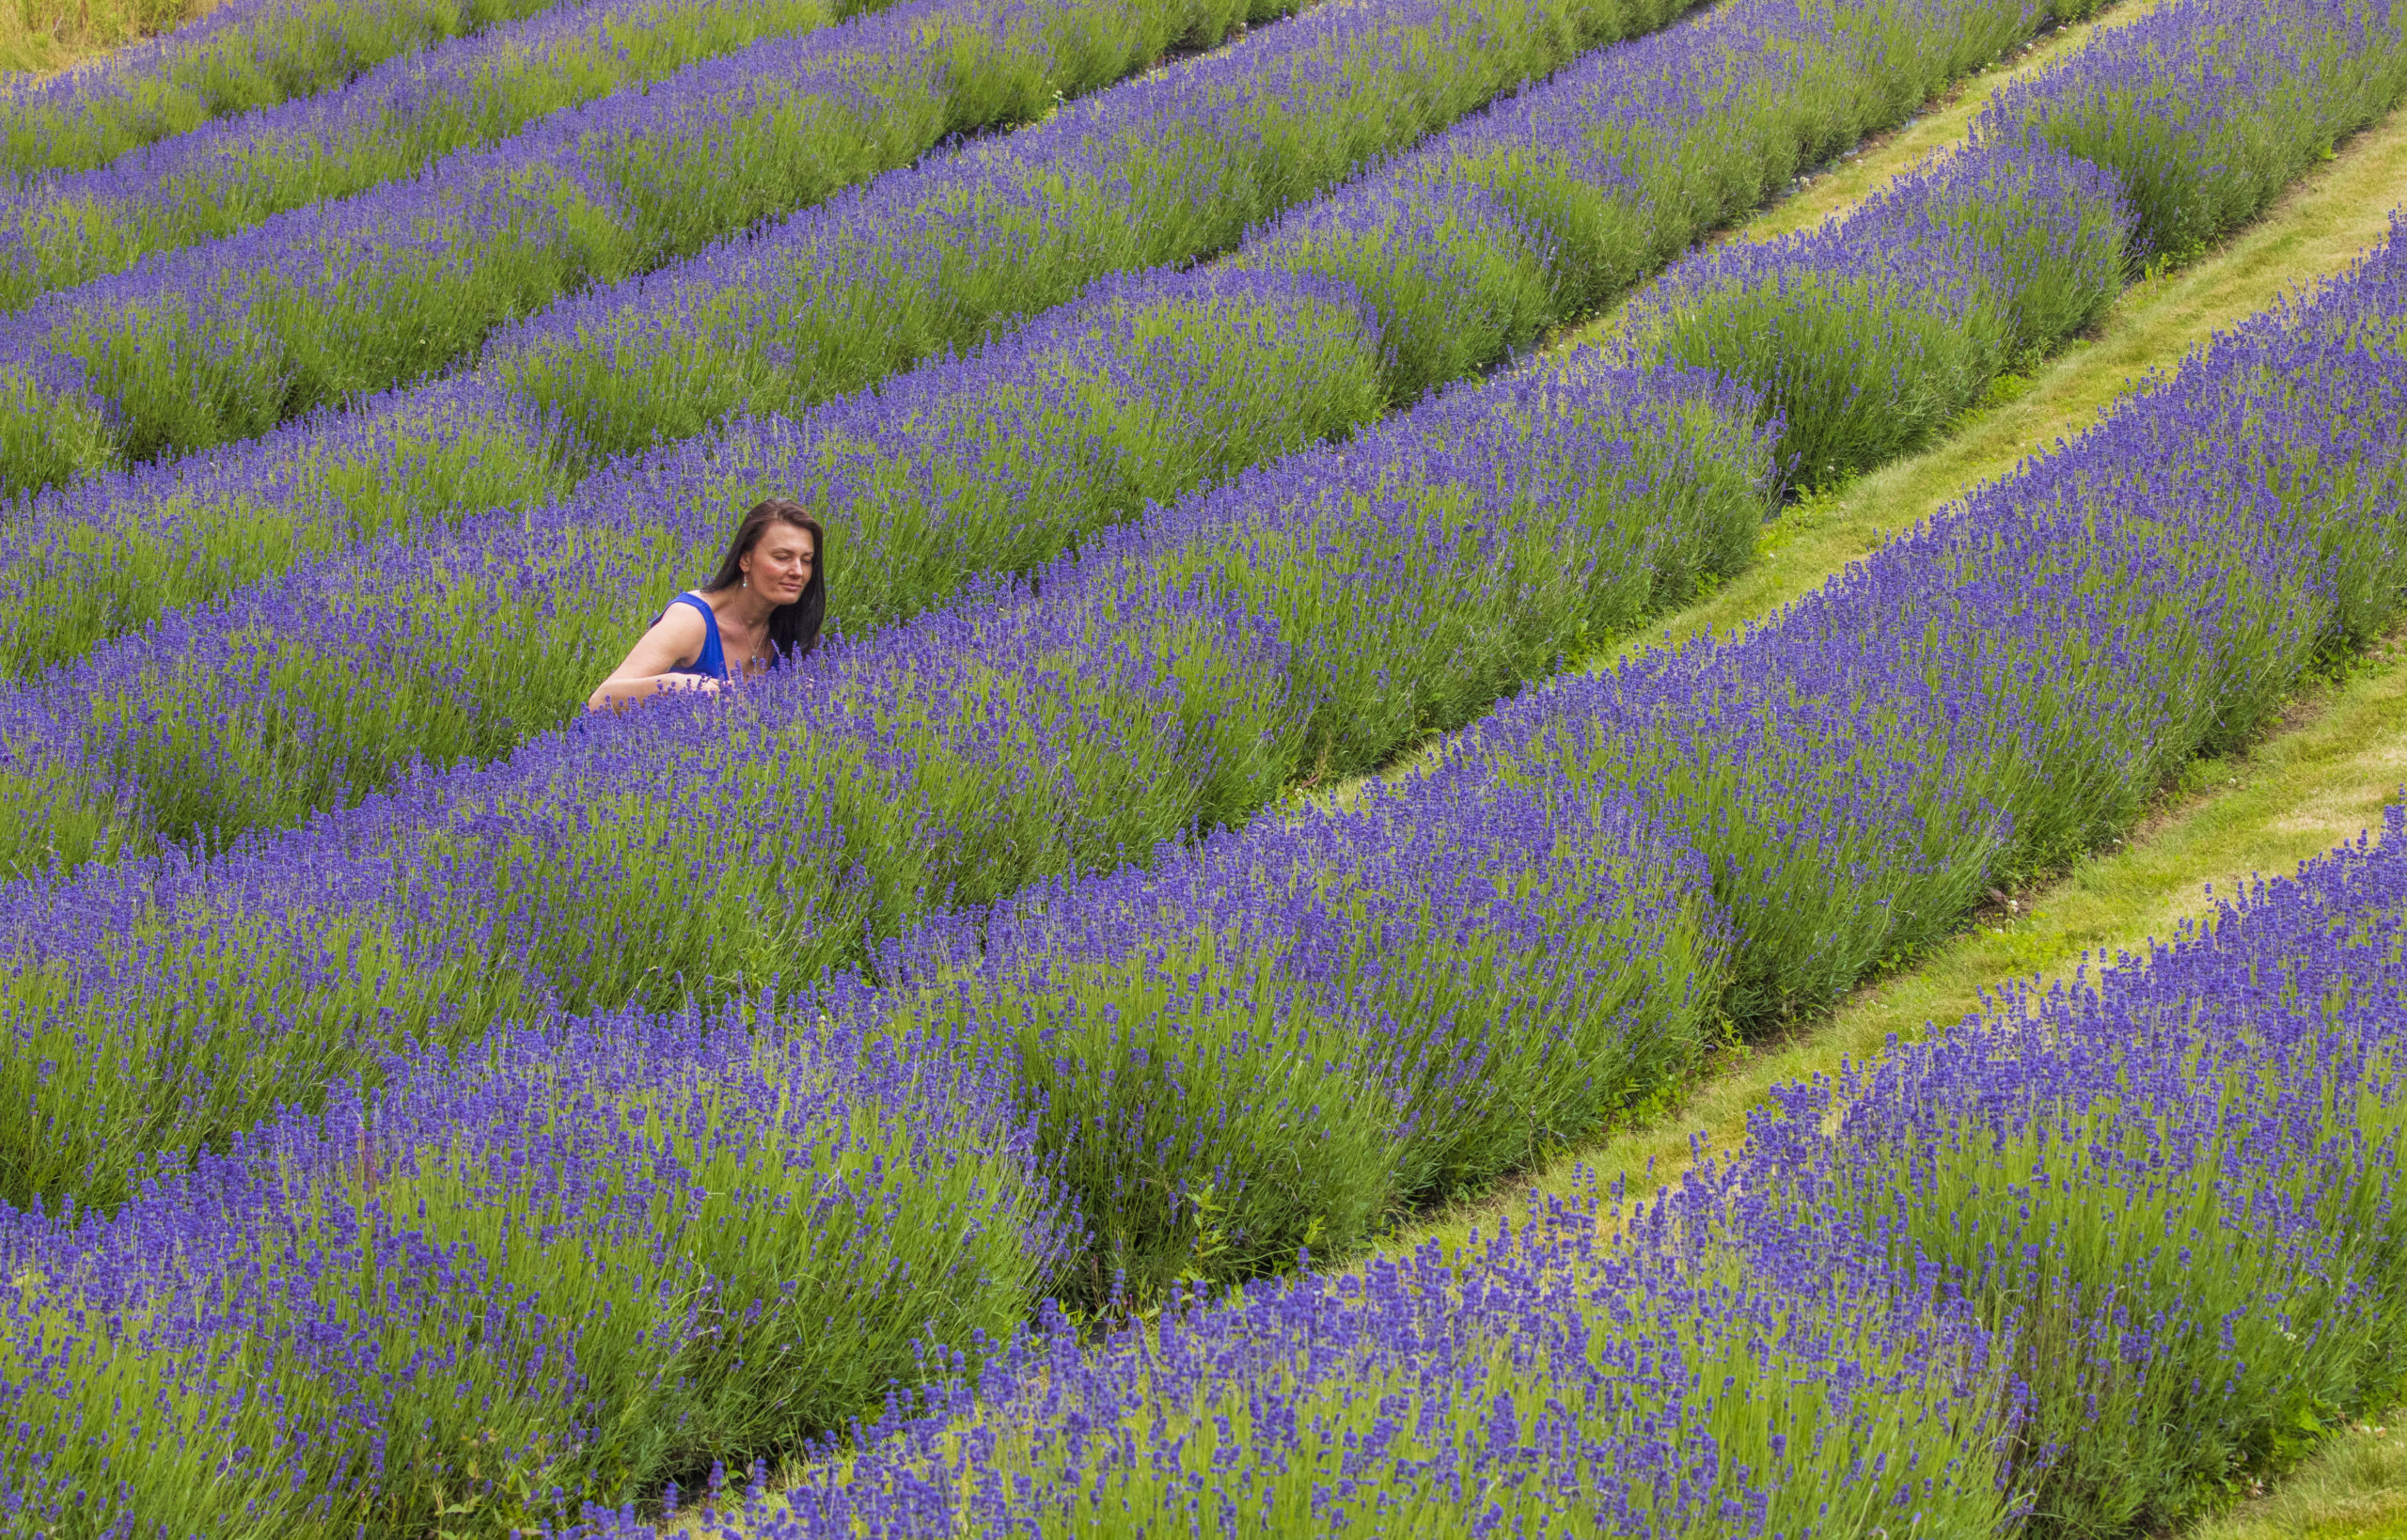 The lavender grows on a three acre field. SWNS.